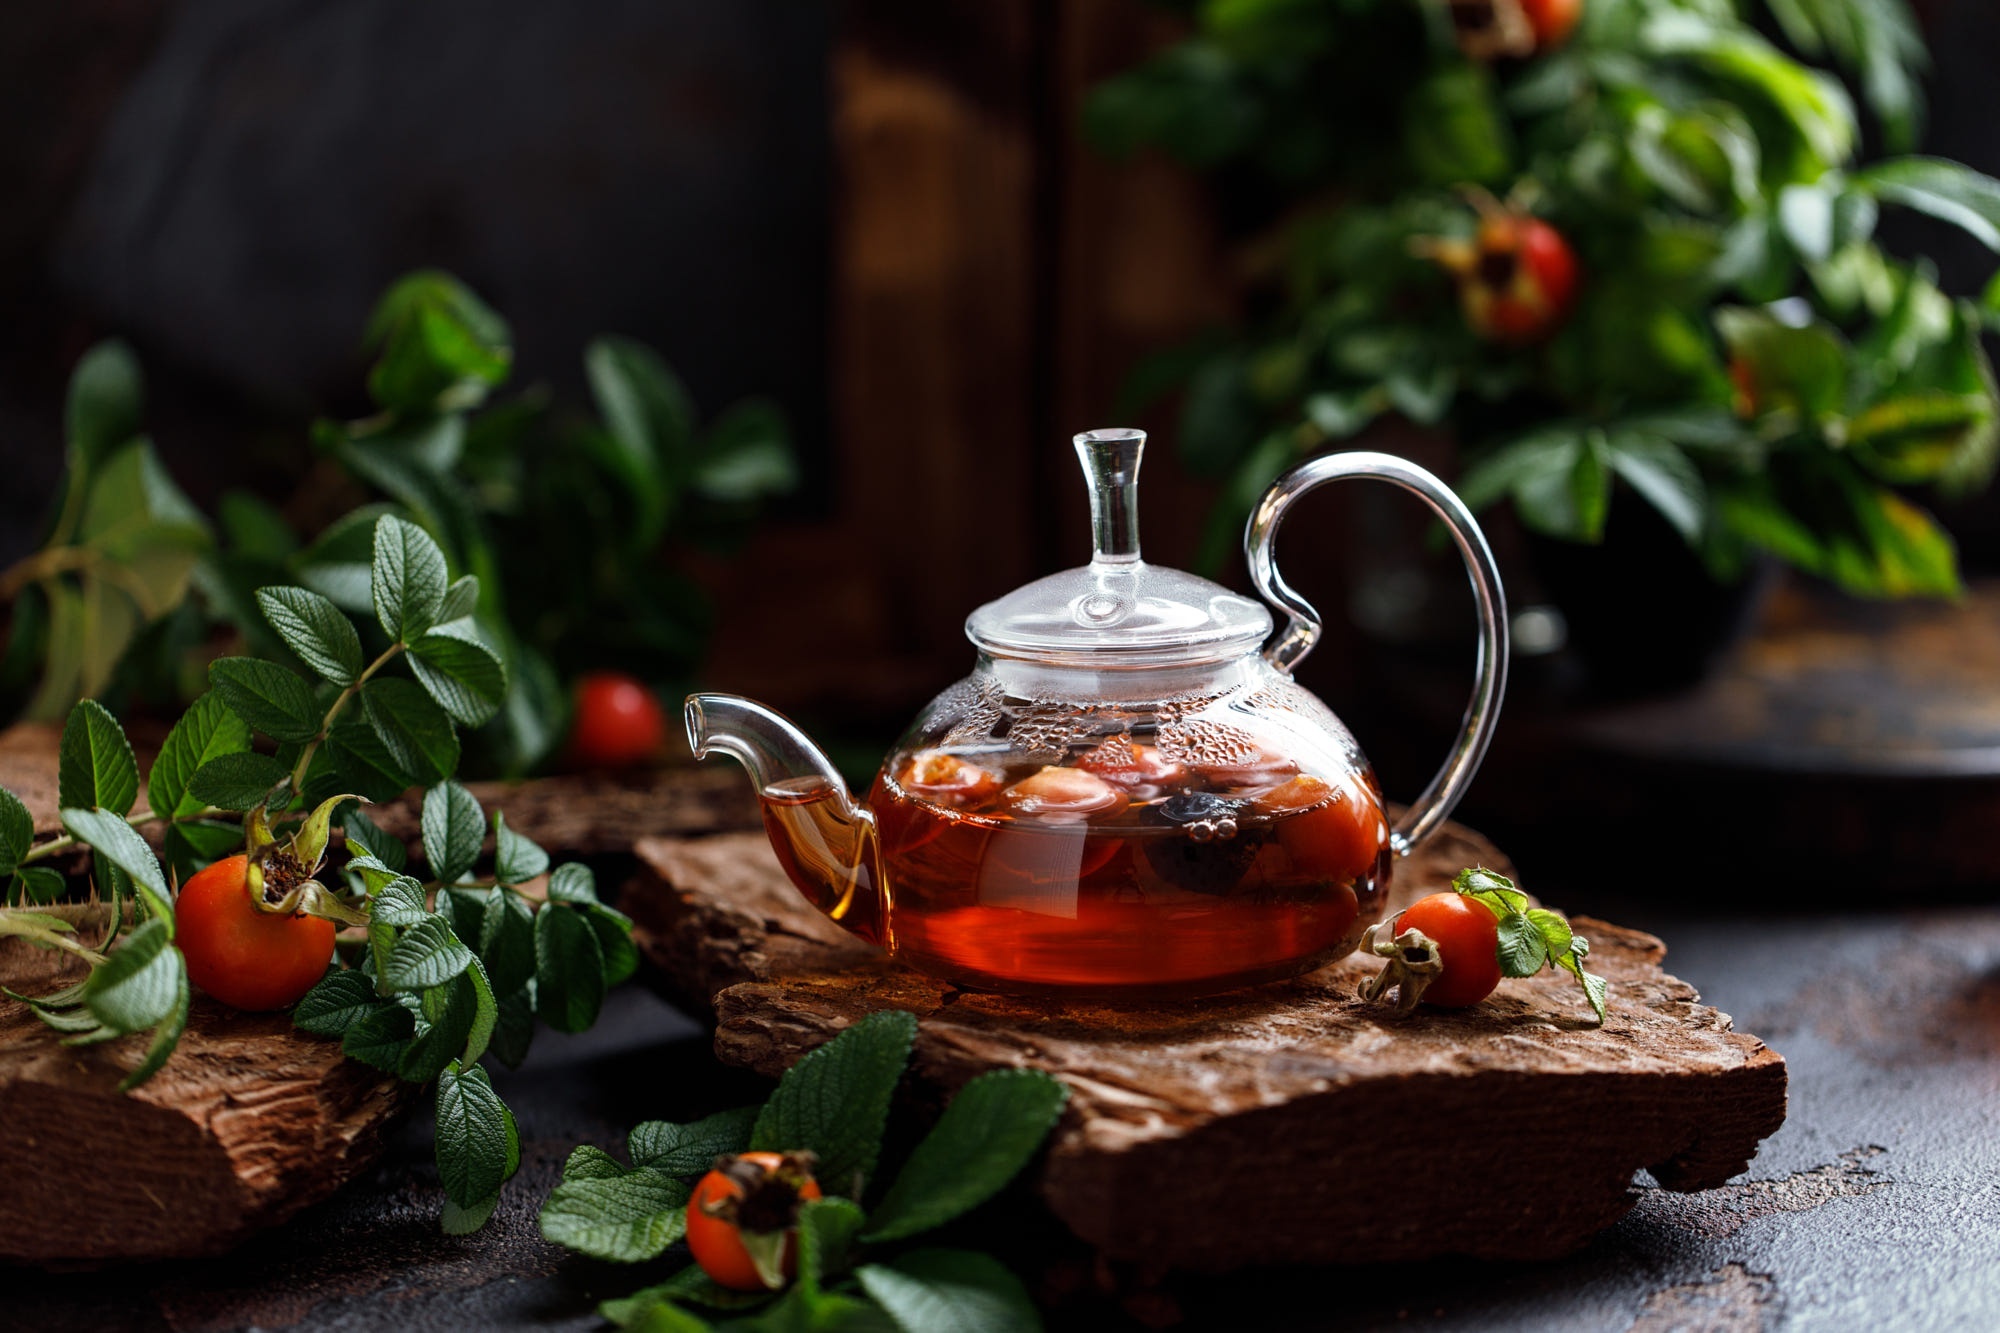 Tea: Container for brewing organic beverages, Rose hips, high in vitamin C. 2000x1340 HD Wallpaper.